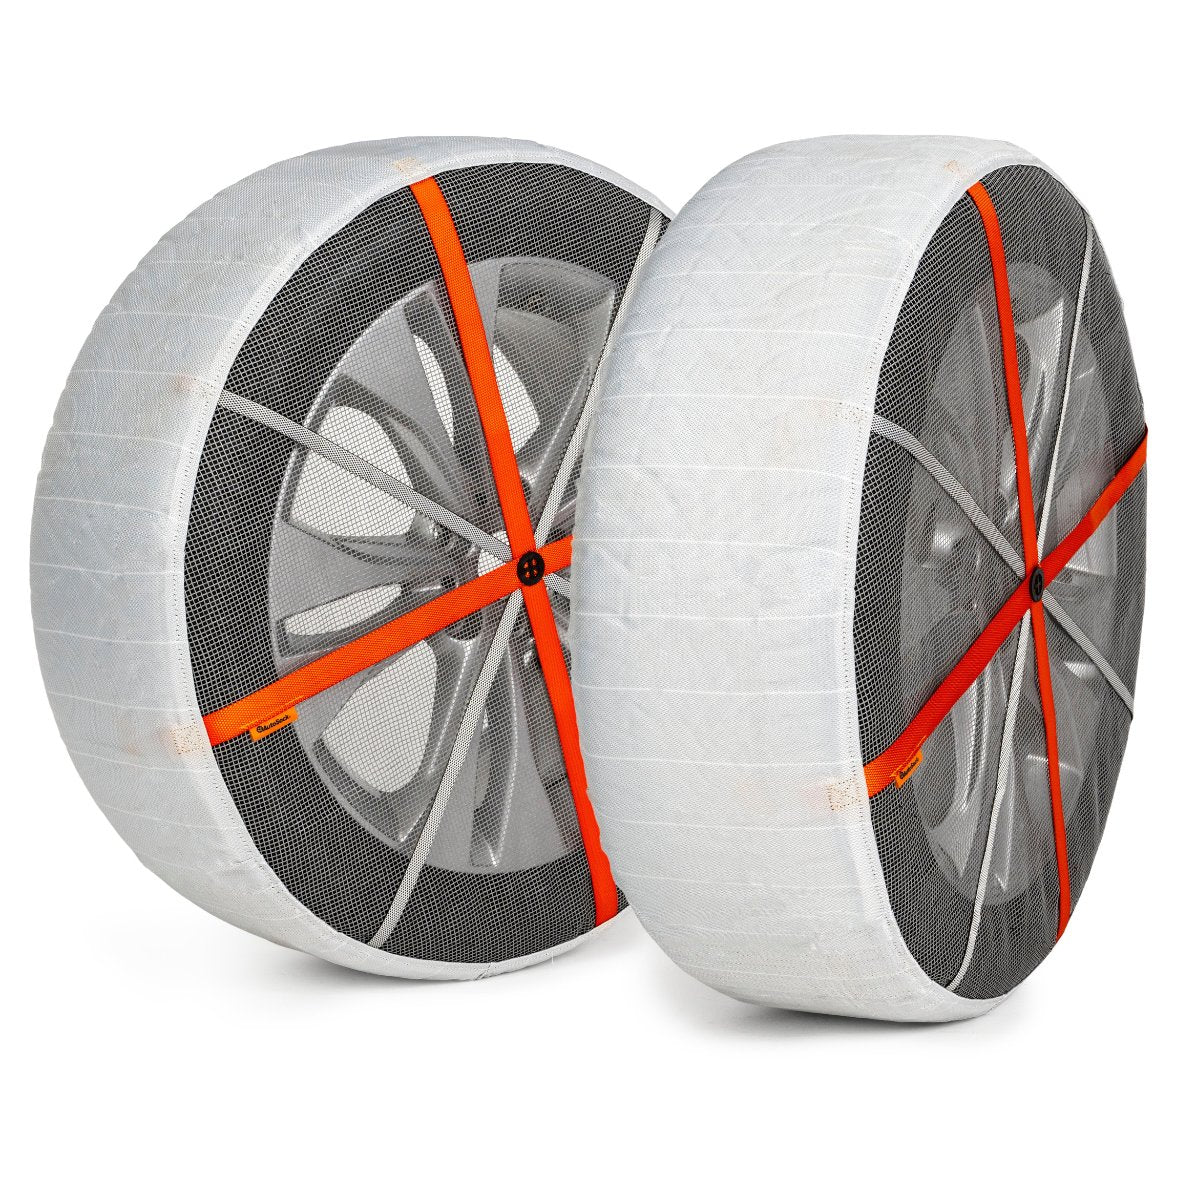 Pair of AutoSock textile snow chains installed on two wheels in front of white background showing product frontside AL59 AL 59